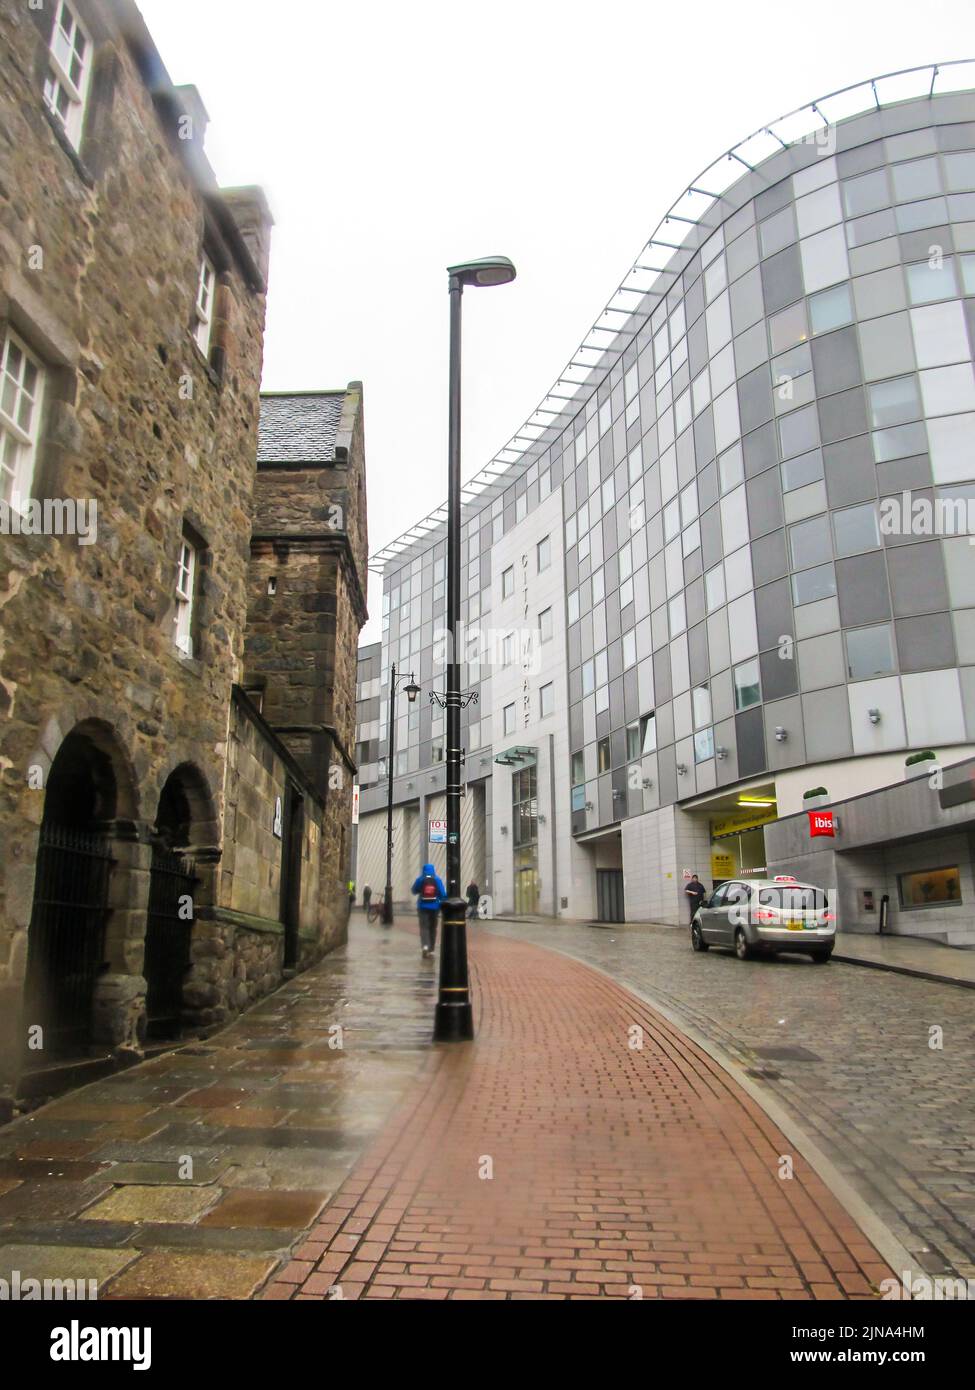 Contrasts in Aberdeen, looking up a city street with an old stone building on the one side and a modern glass office building on the other side. Stock Photo